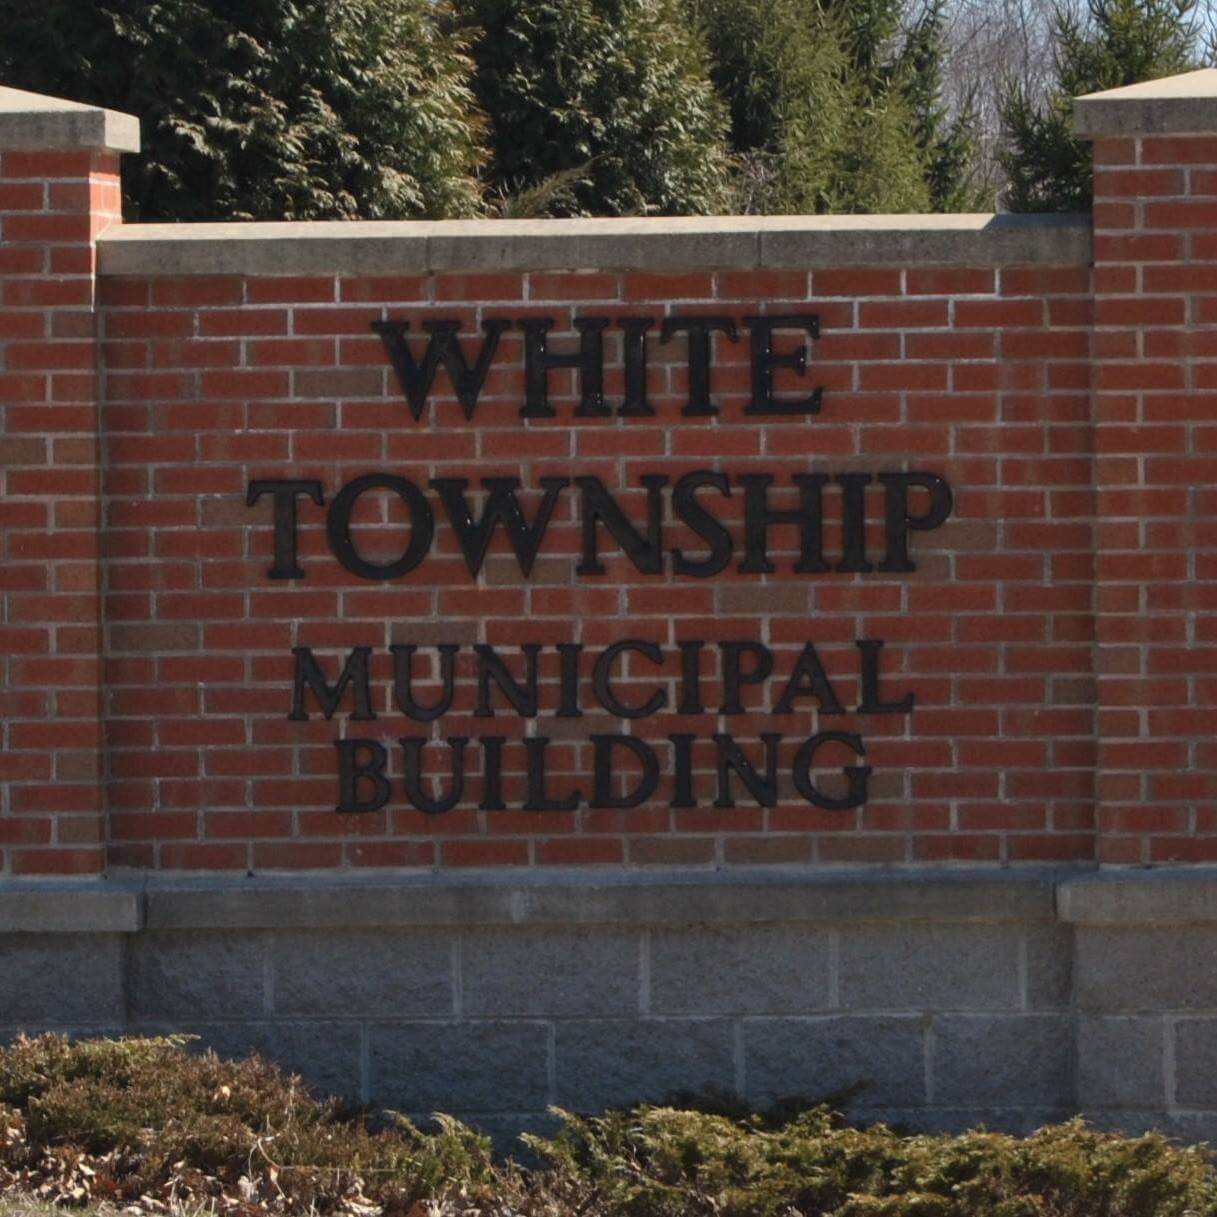 image of White Township Municipal Building